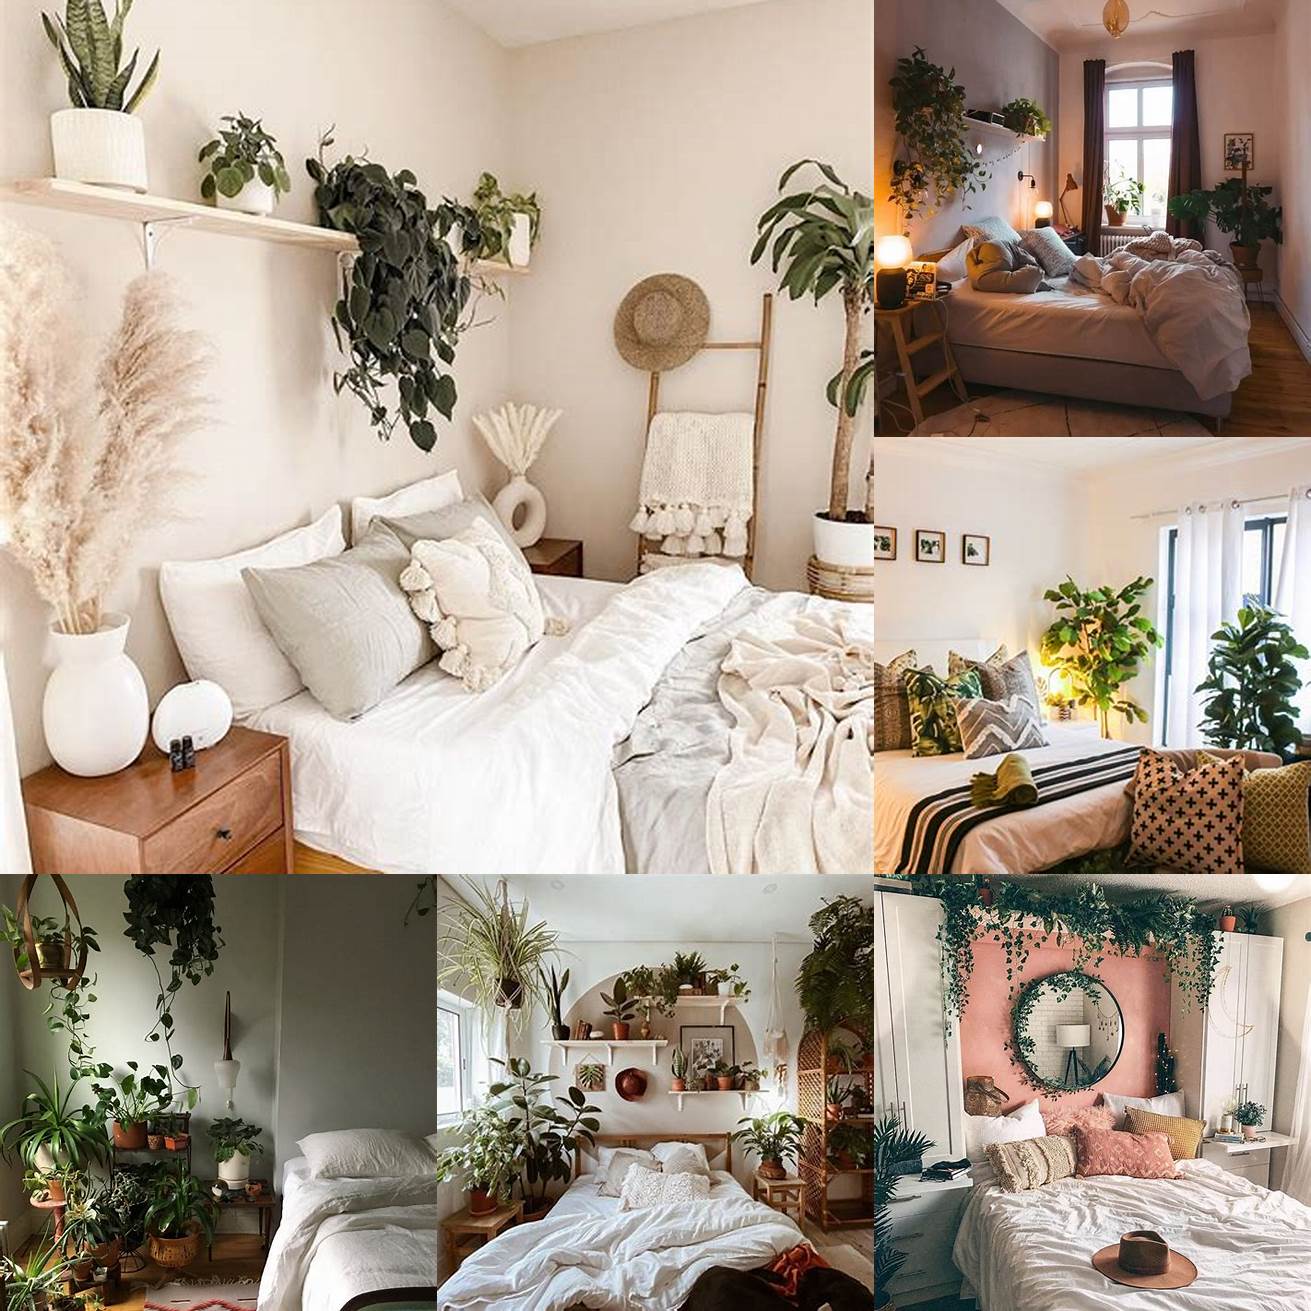 Relaxing bedroom with soft lighting and plants